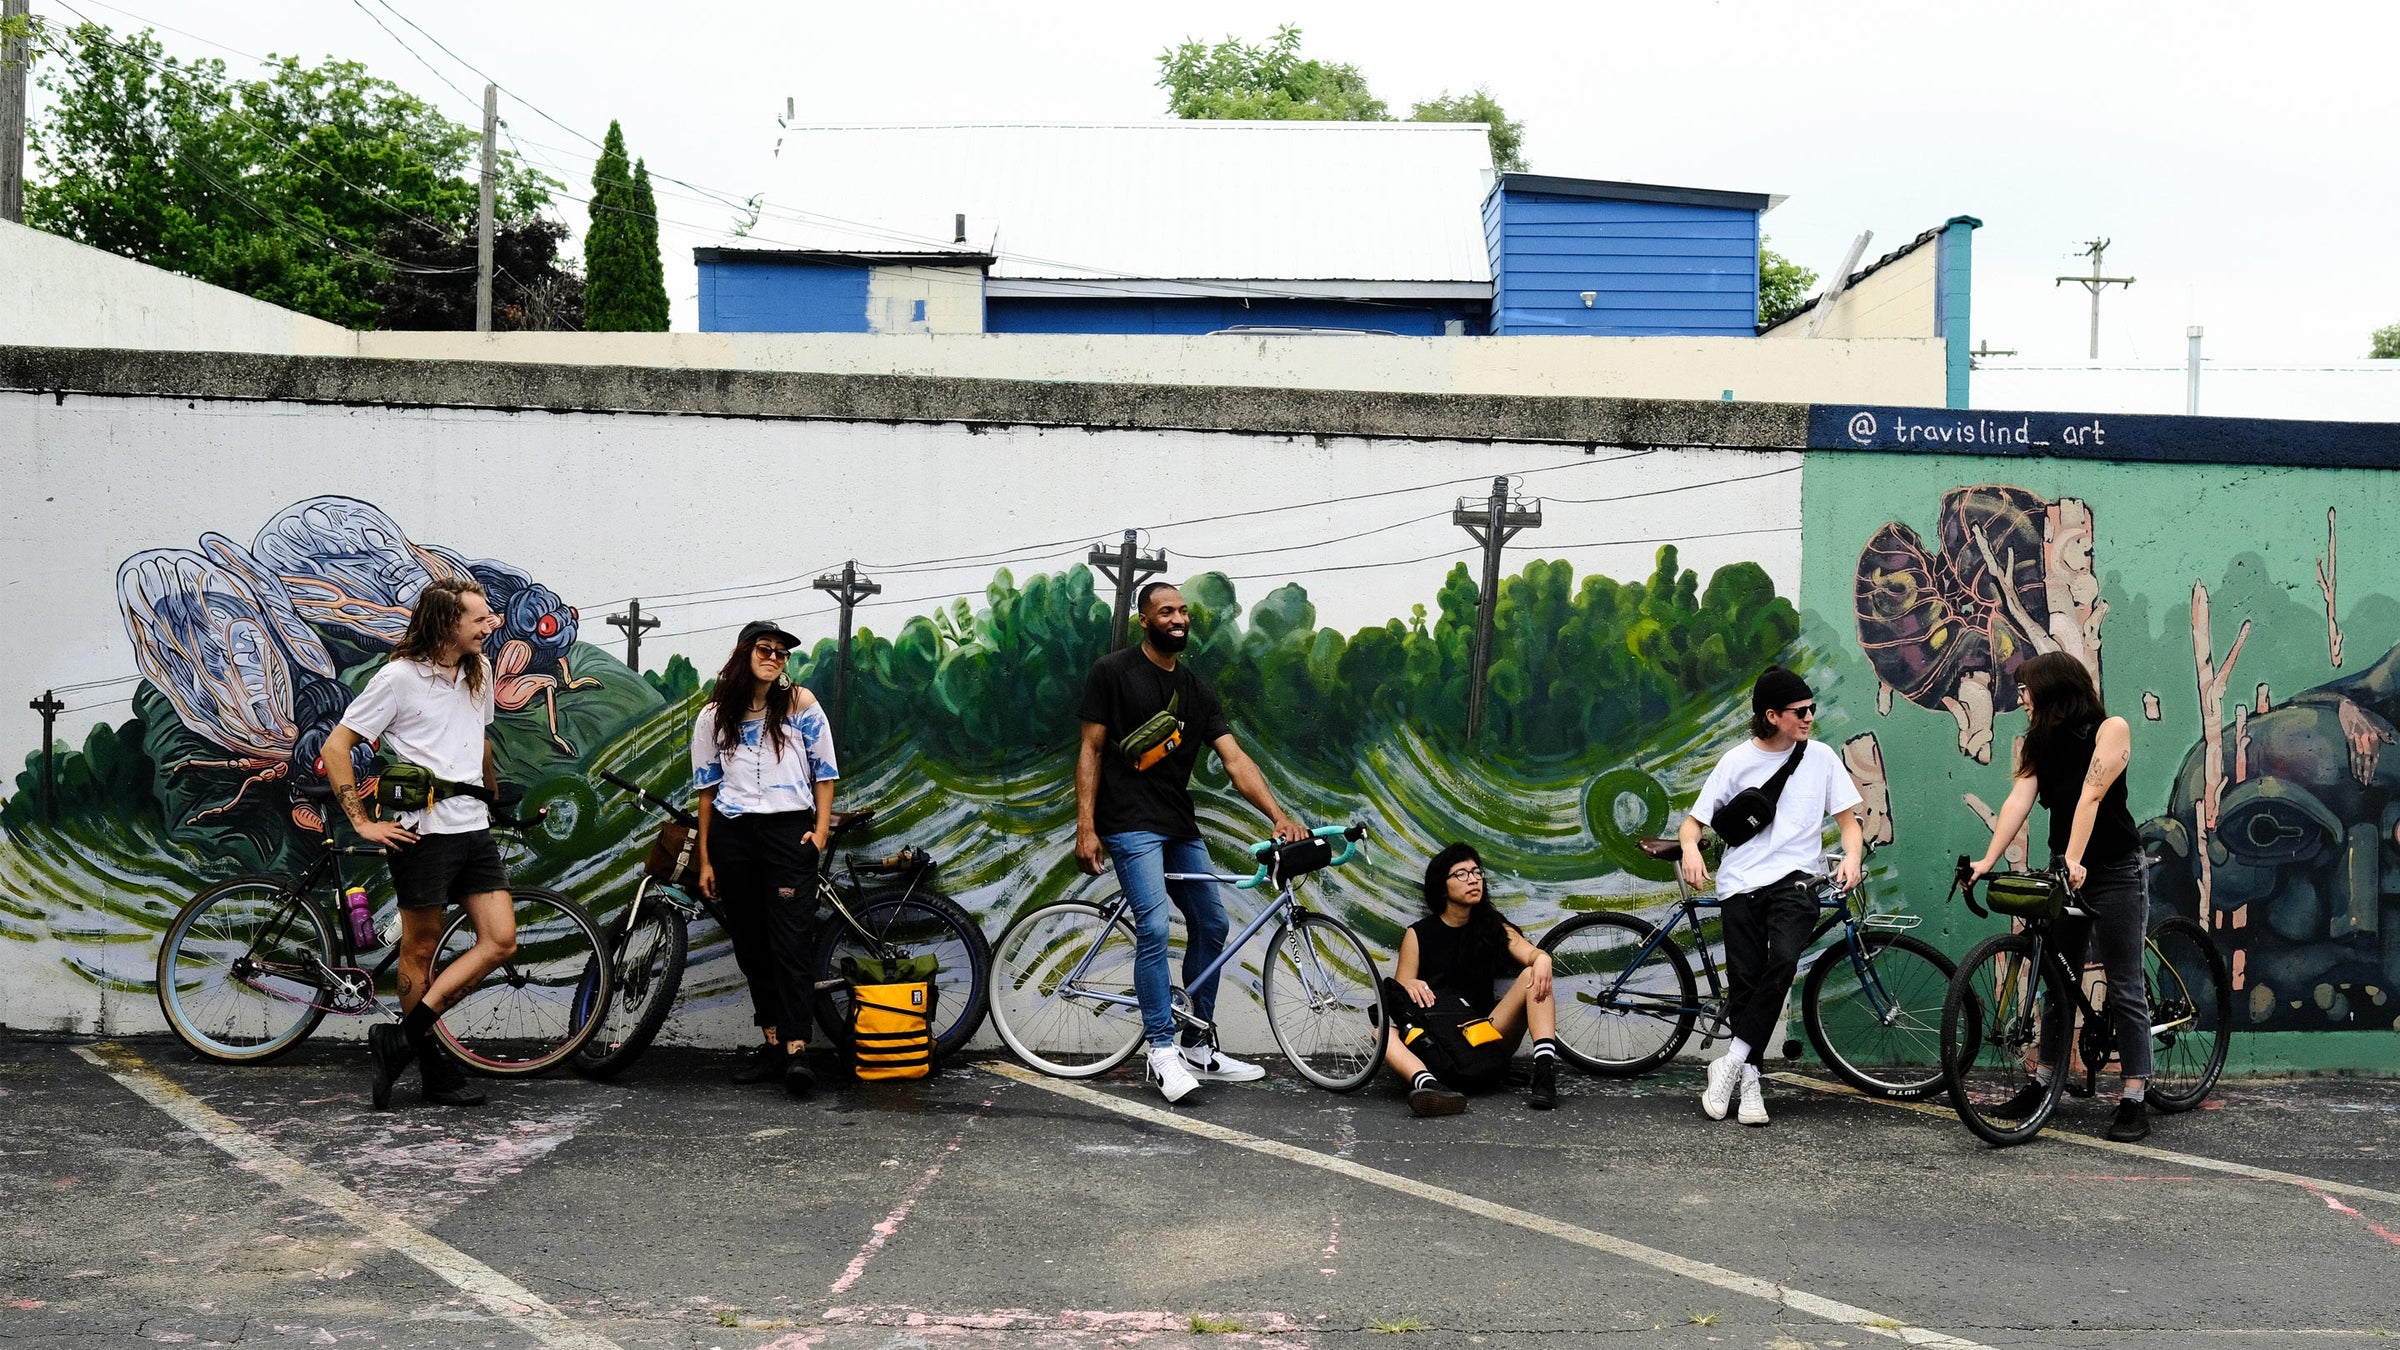 Wonder Goods crew hanging out with their bags by a mural